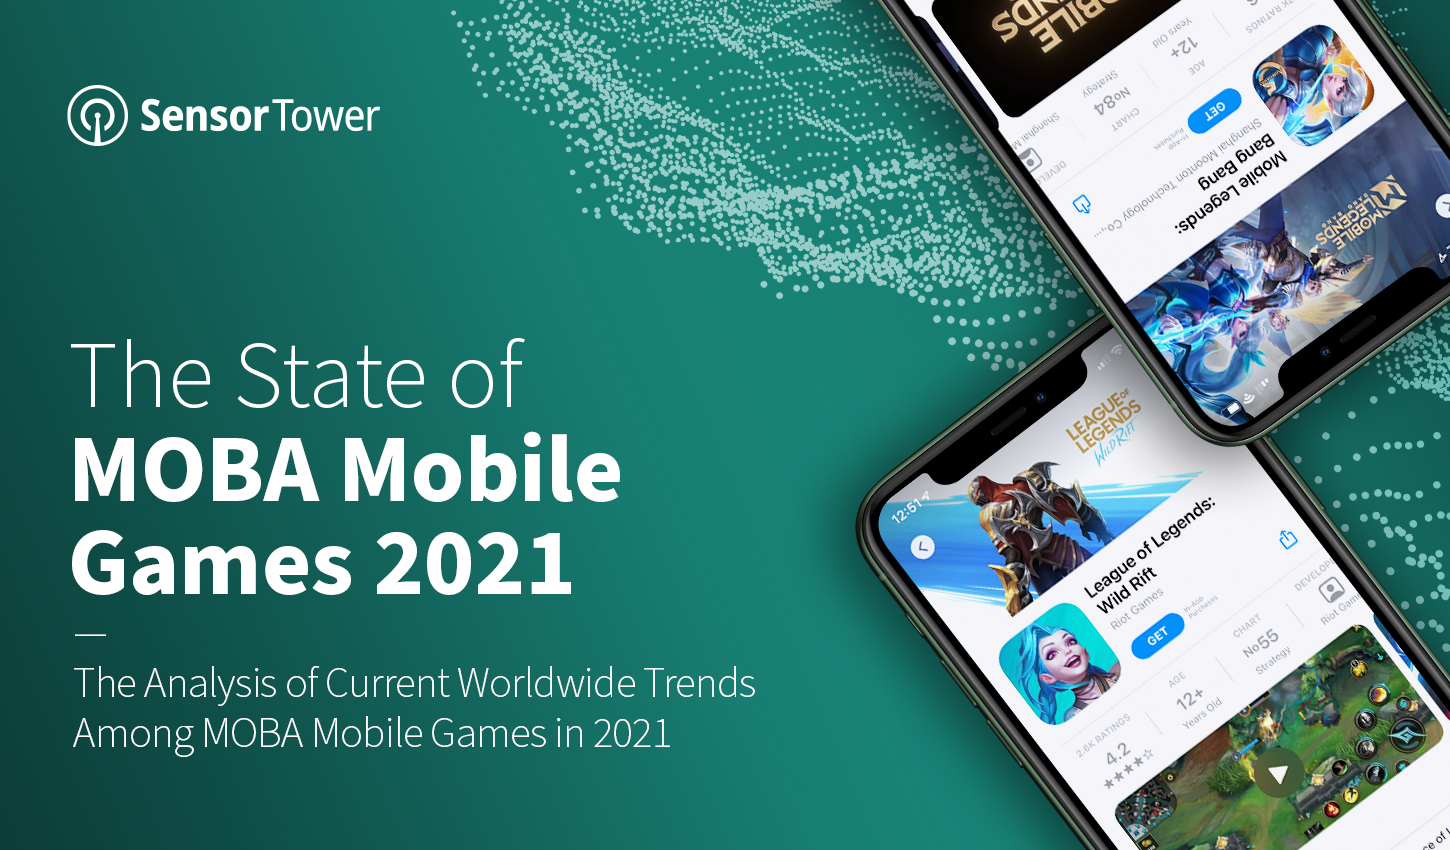 State of MOBA Mobile Games 2021 Report main image feature